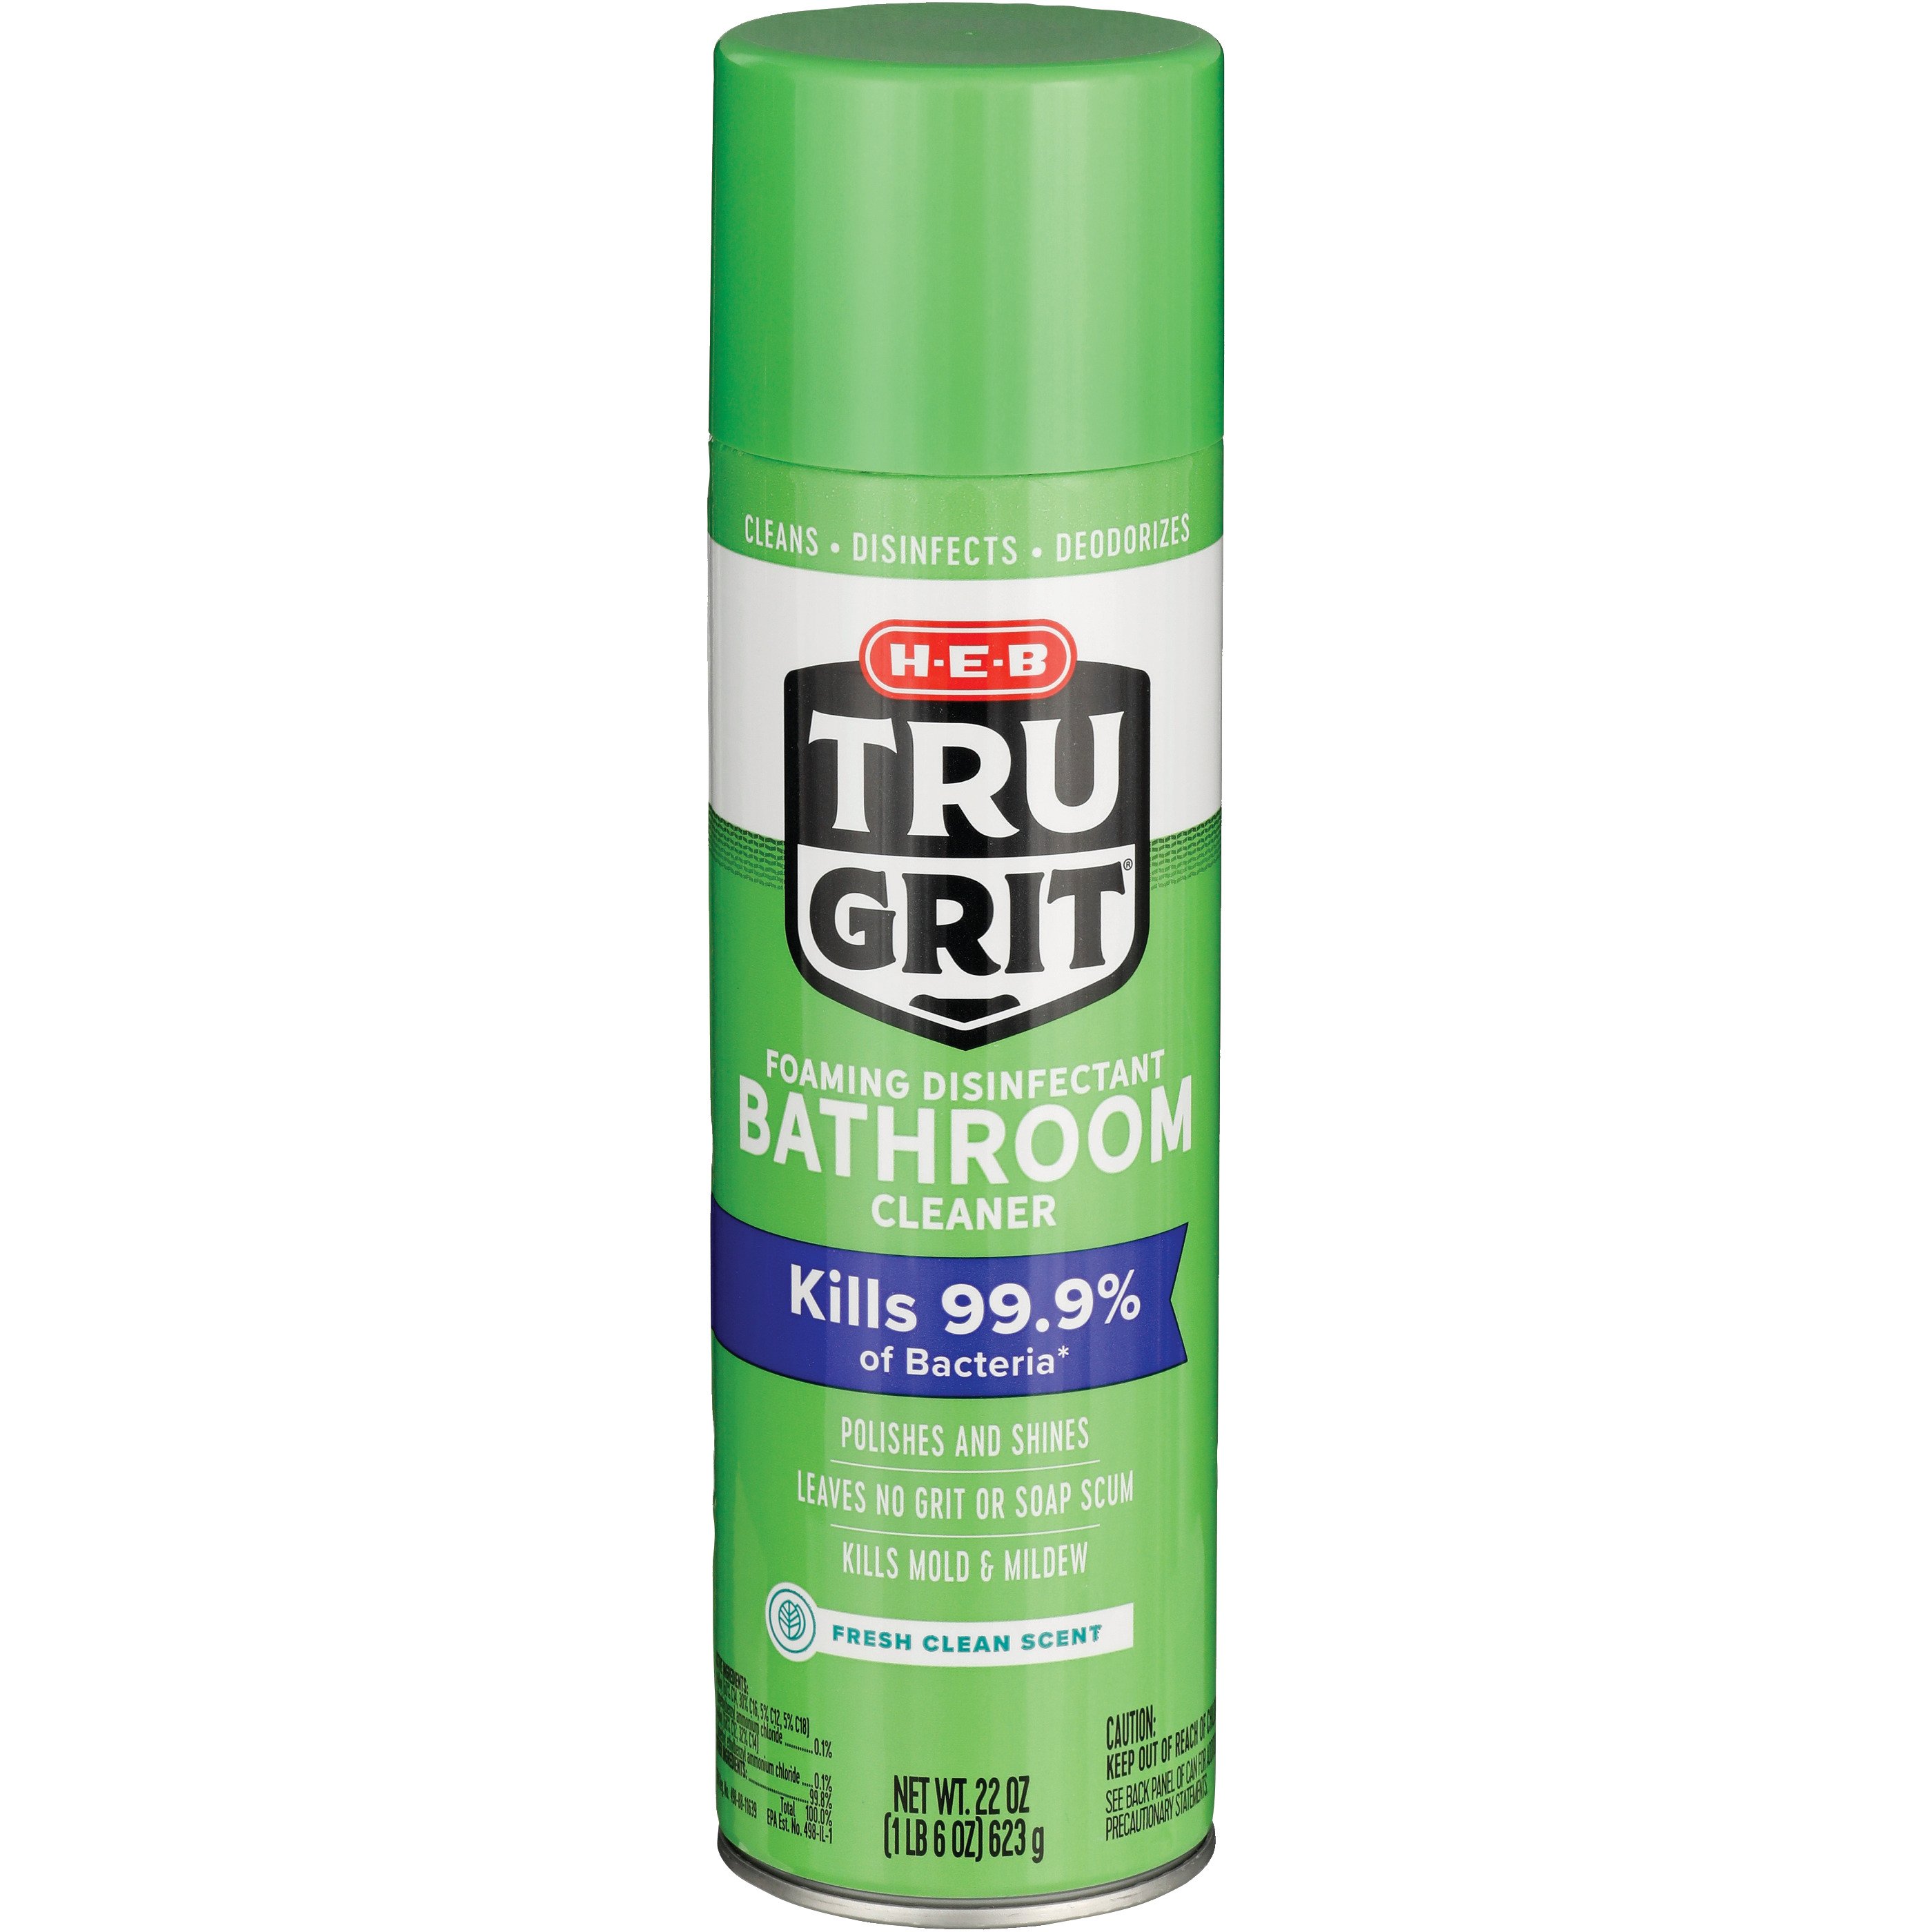 H-E-B Tru Grit Foaming Disinfectant Bathroom Cleaner - Shop All Purpose  Cleaners at H-E-B